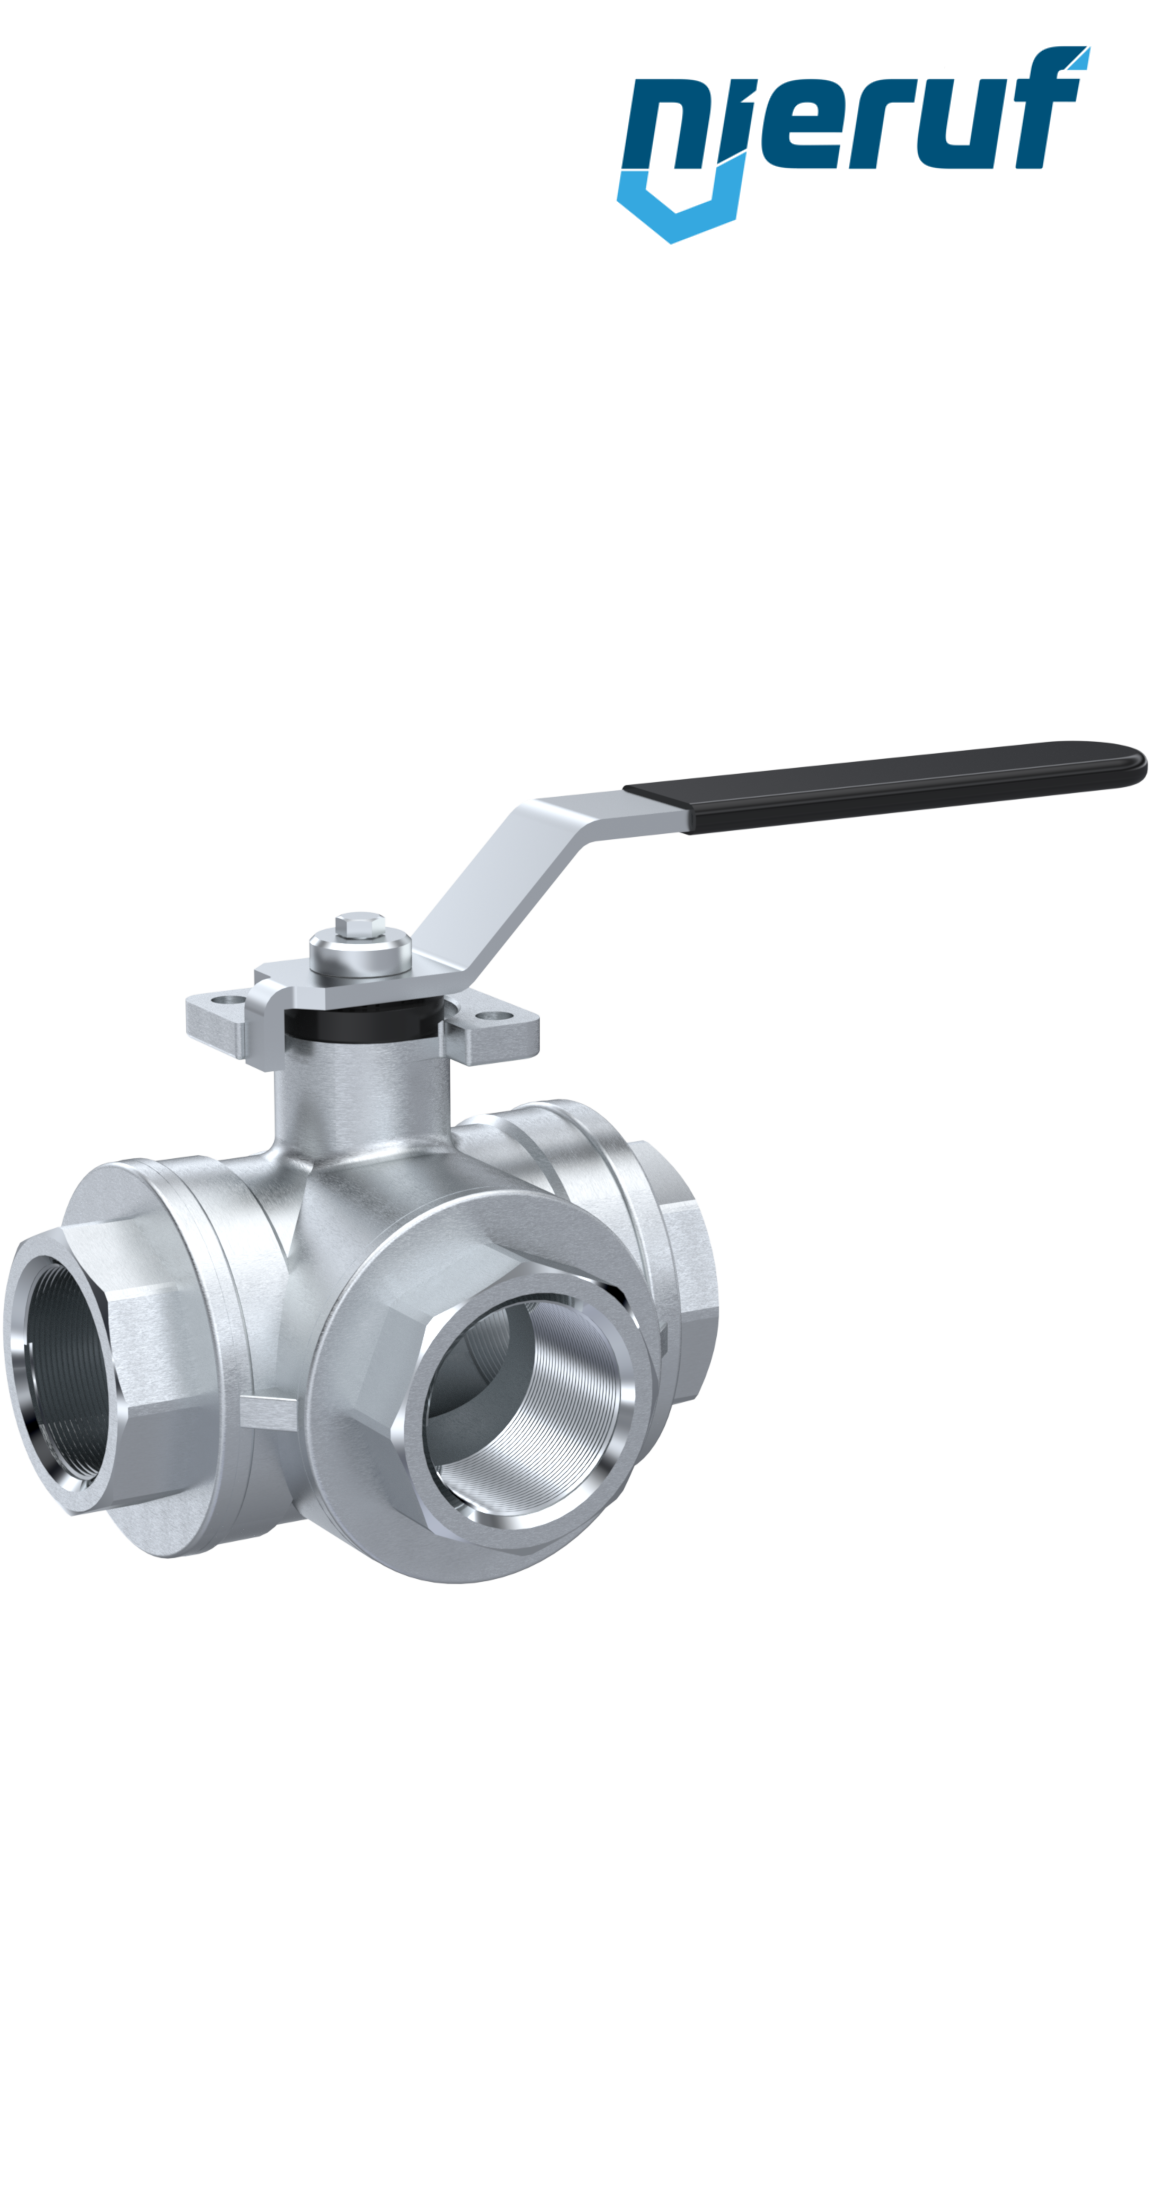 3  way brass ball valve DN50 - 2" inch GK08 full port design with L drilling